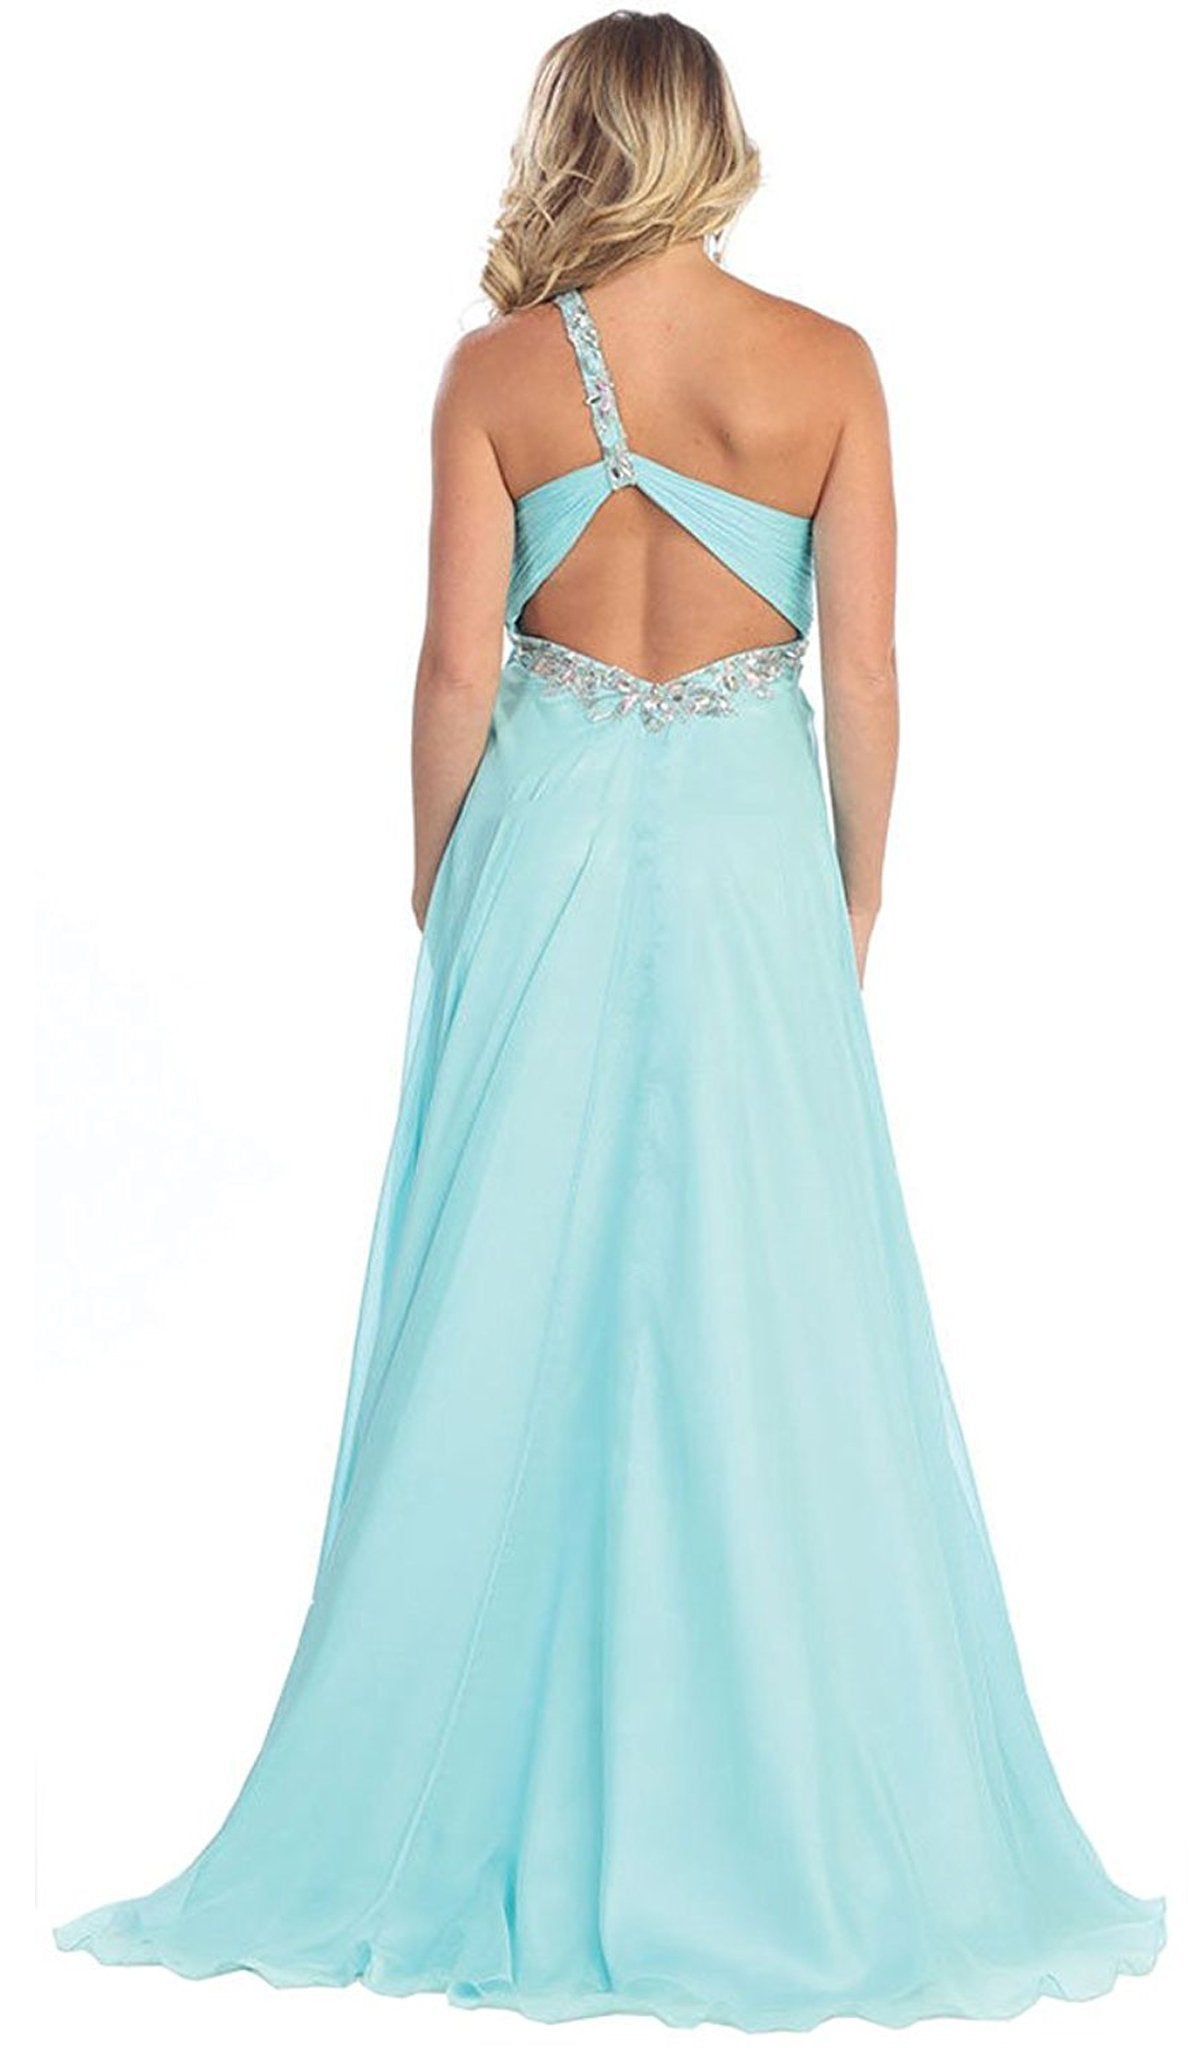 May Queen - MQ1028 Ornate Strap Ruched Sweetheart A-line Prom Dress Special Occasion Dress